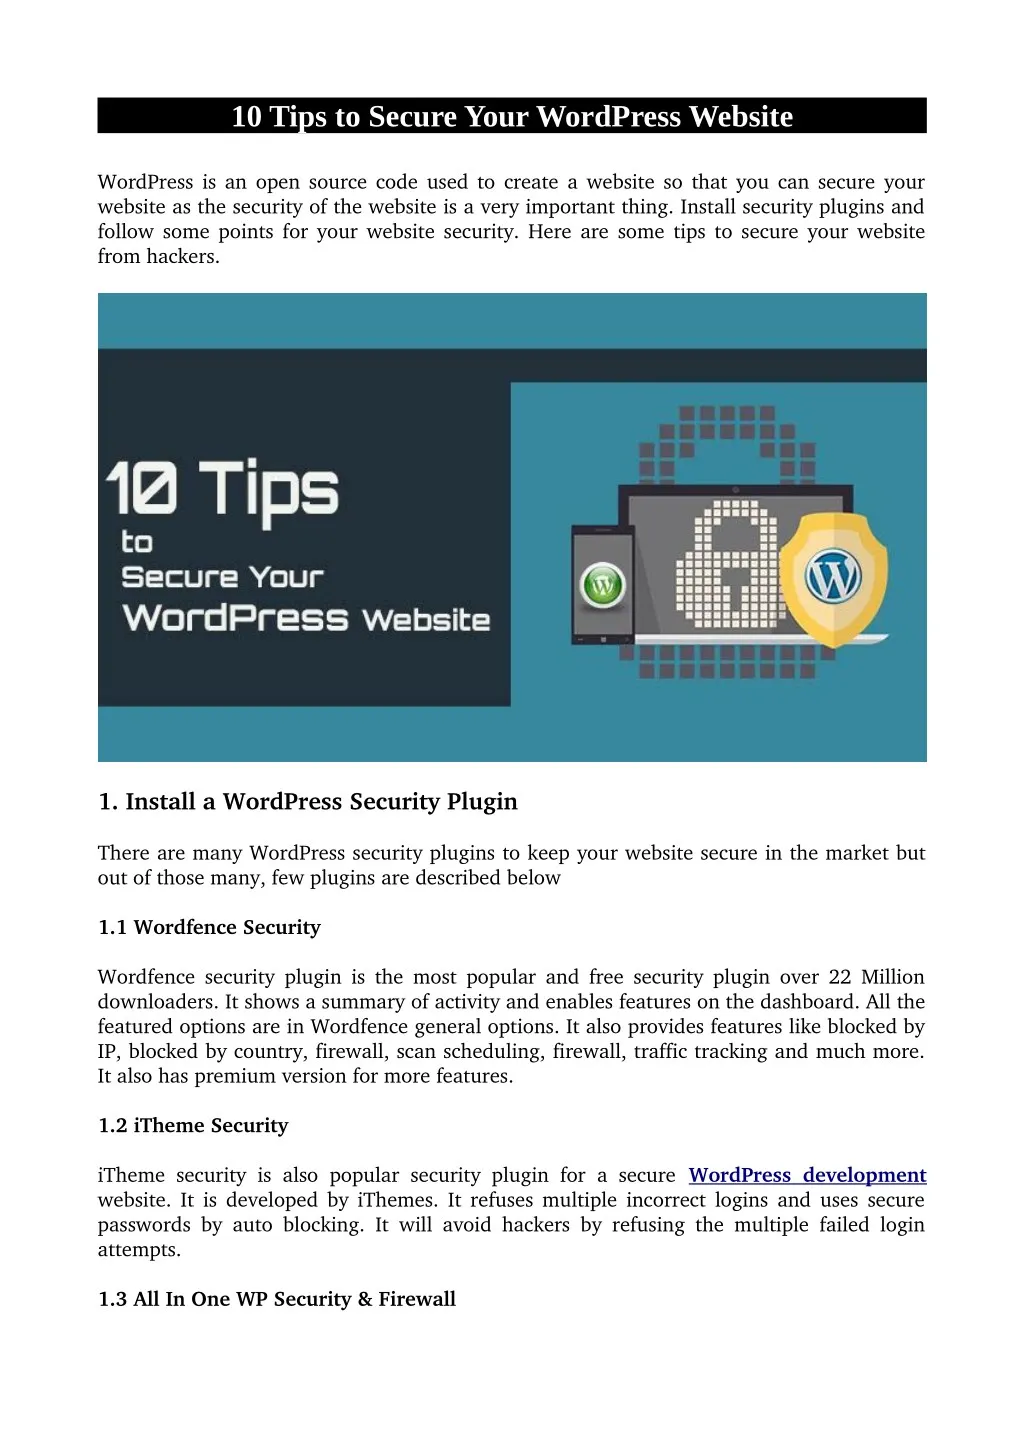 10 tips to secure your wordpress website